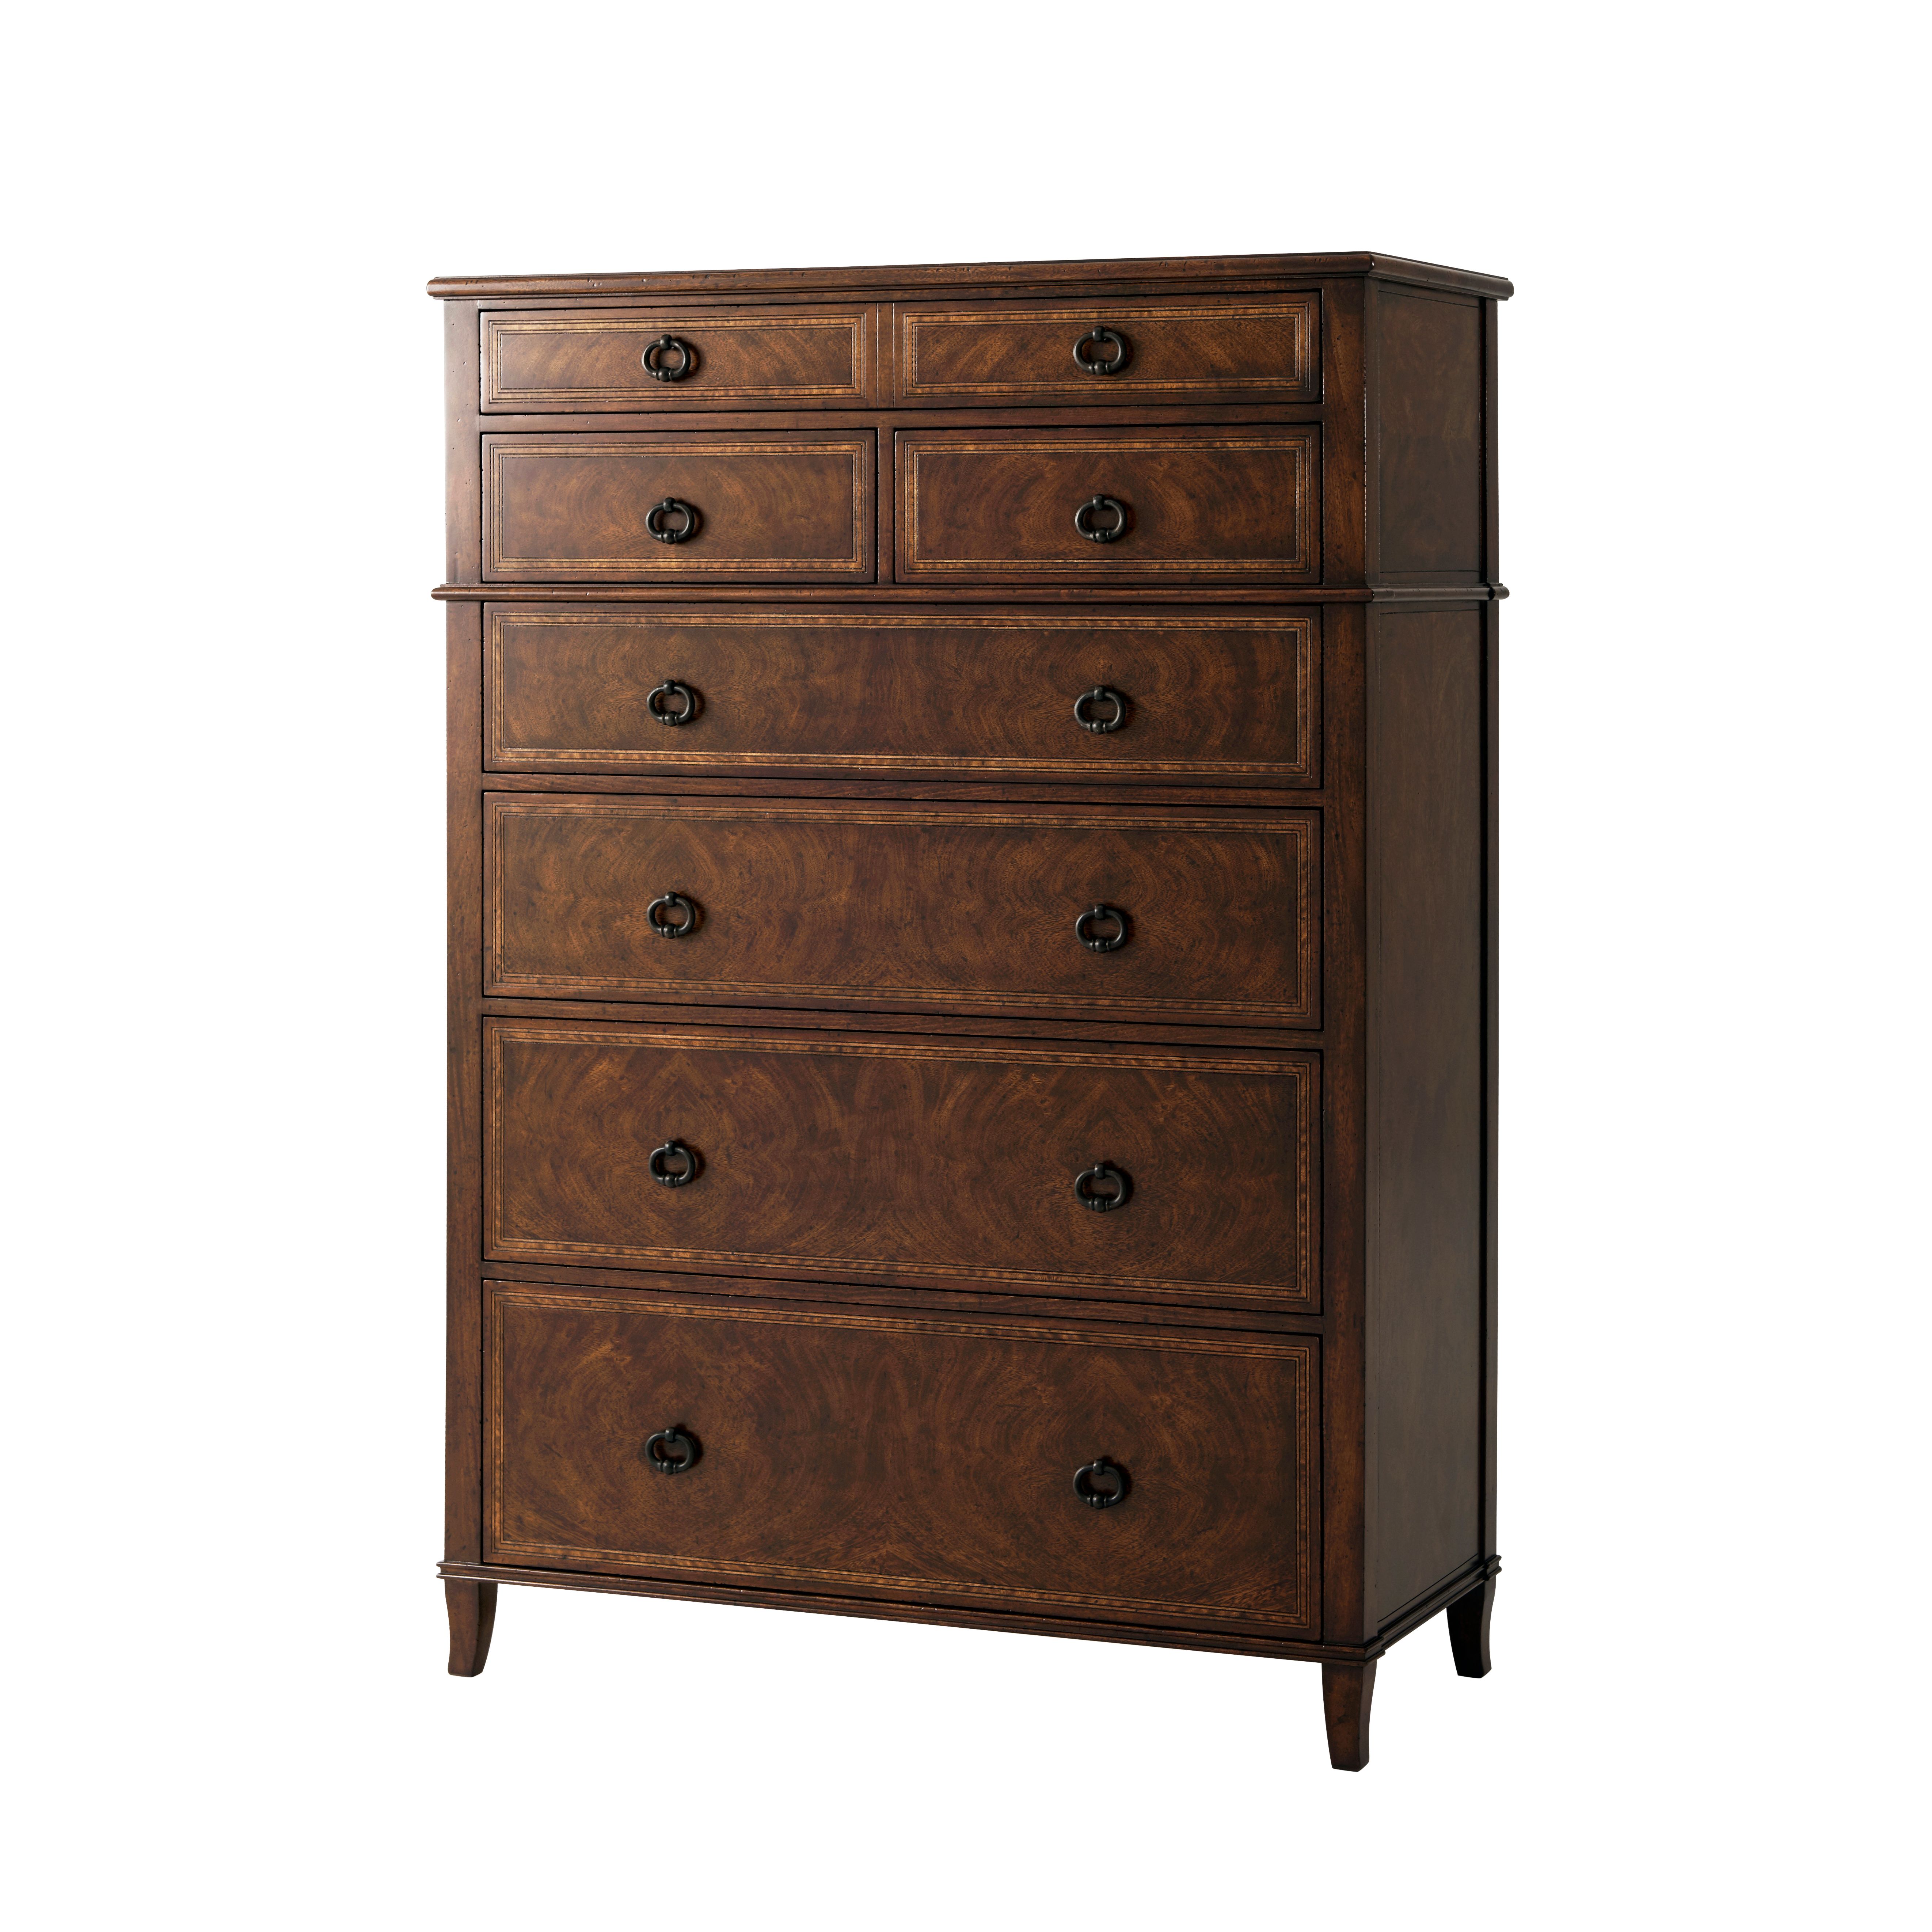 BROOKSBY VALET'S COMPANION CHEST